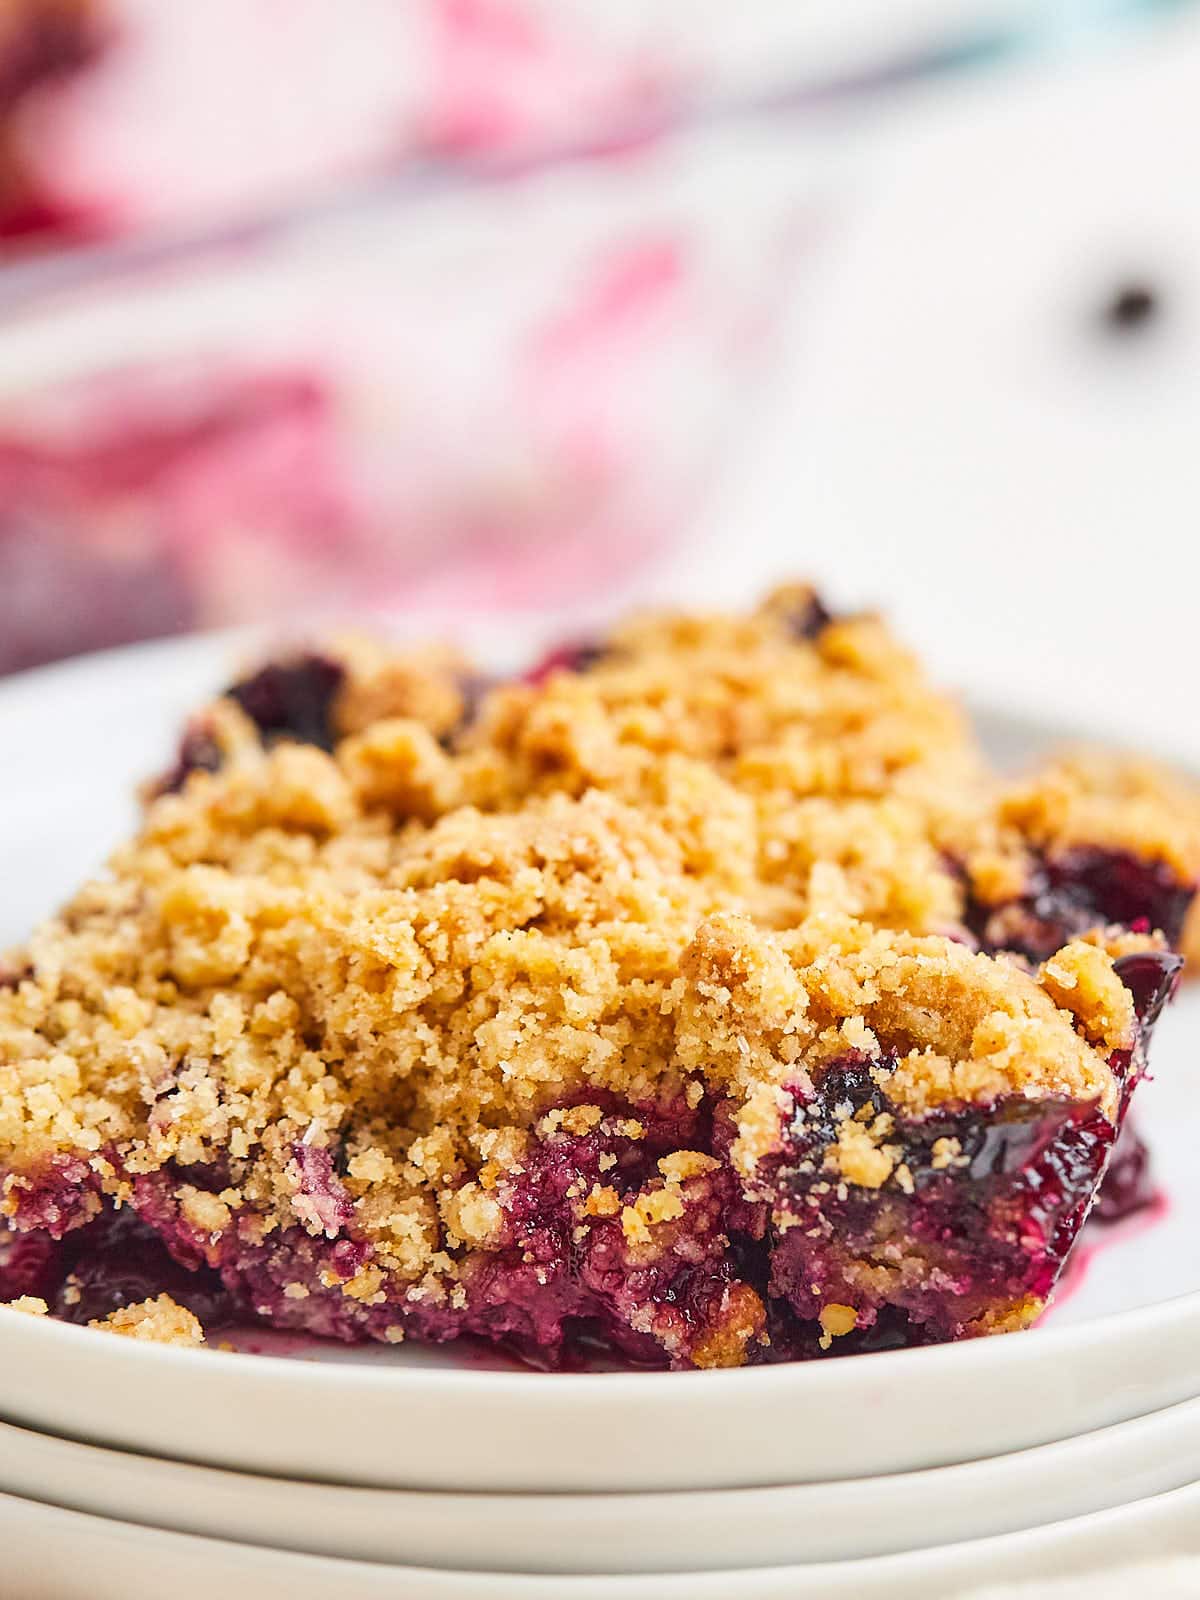 A plate of blueberry crumble, also known as blueberry crisp, on a white plate.